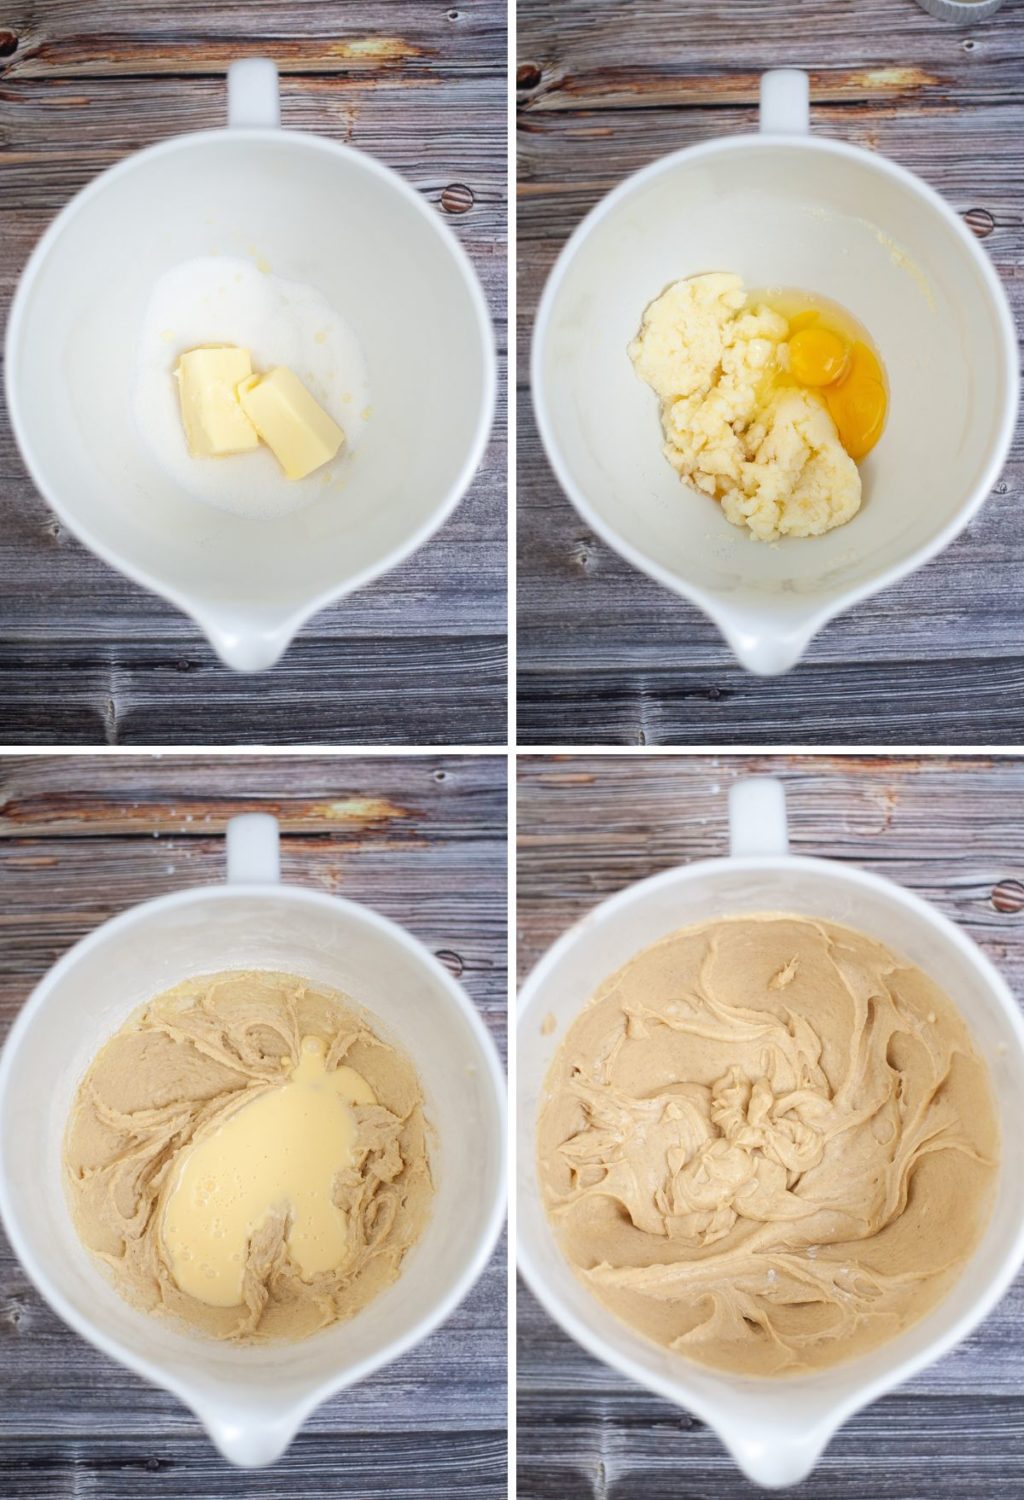 Four pictures showing the process of making peanut butter.